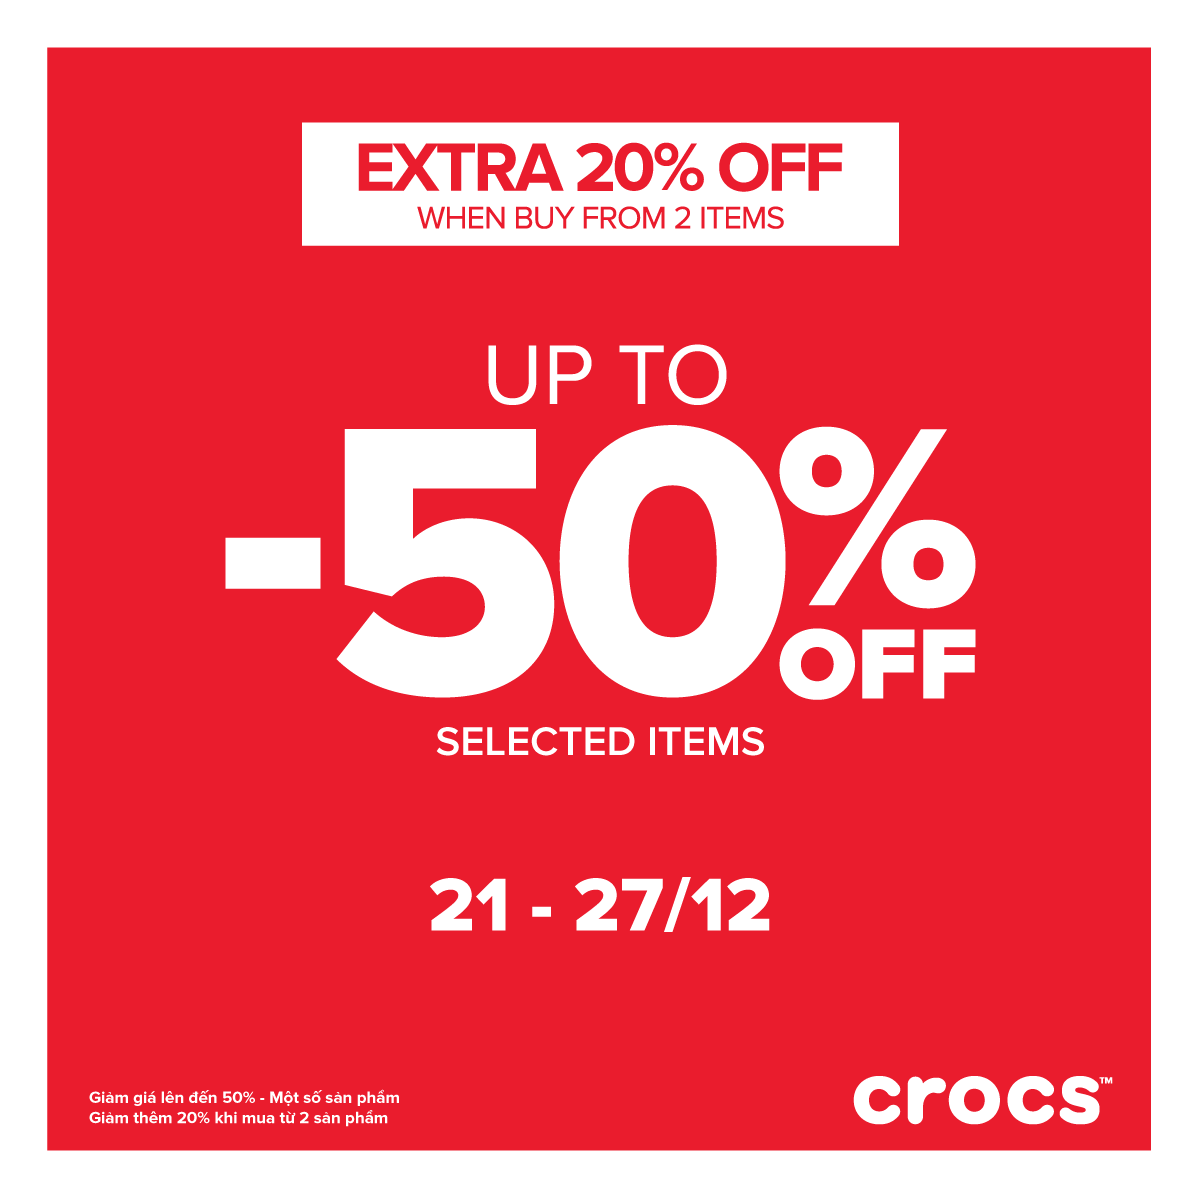 CROCS SALE UP TO 50% & EXTRA 20% OFF